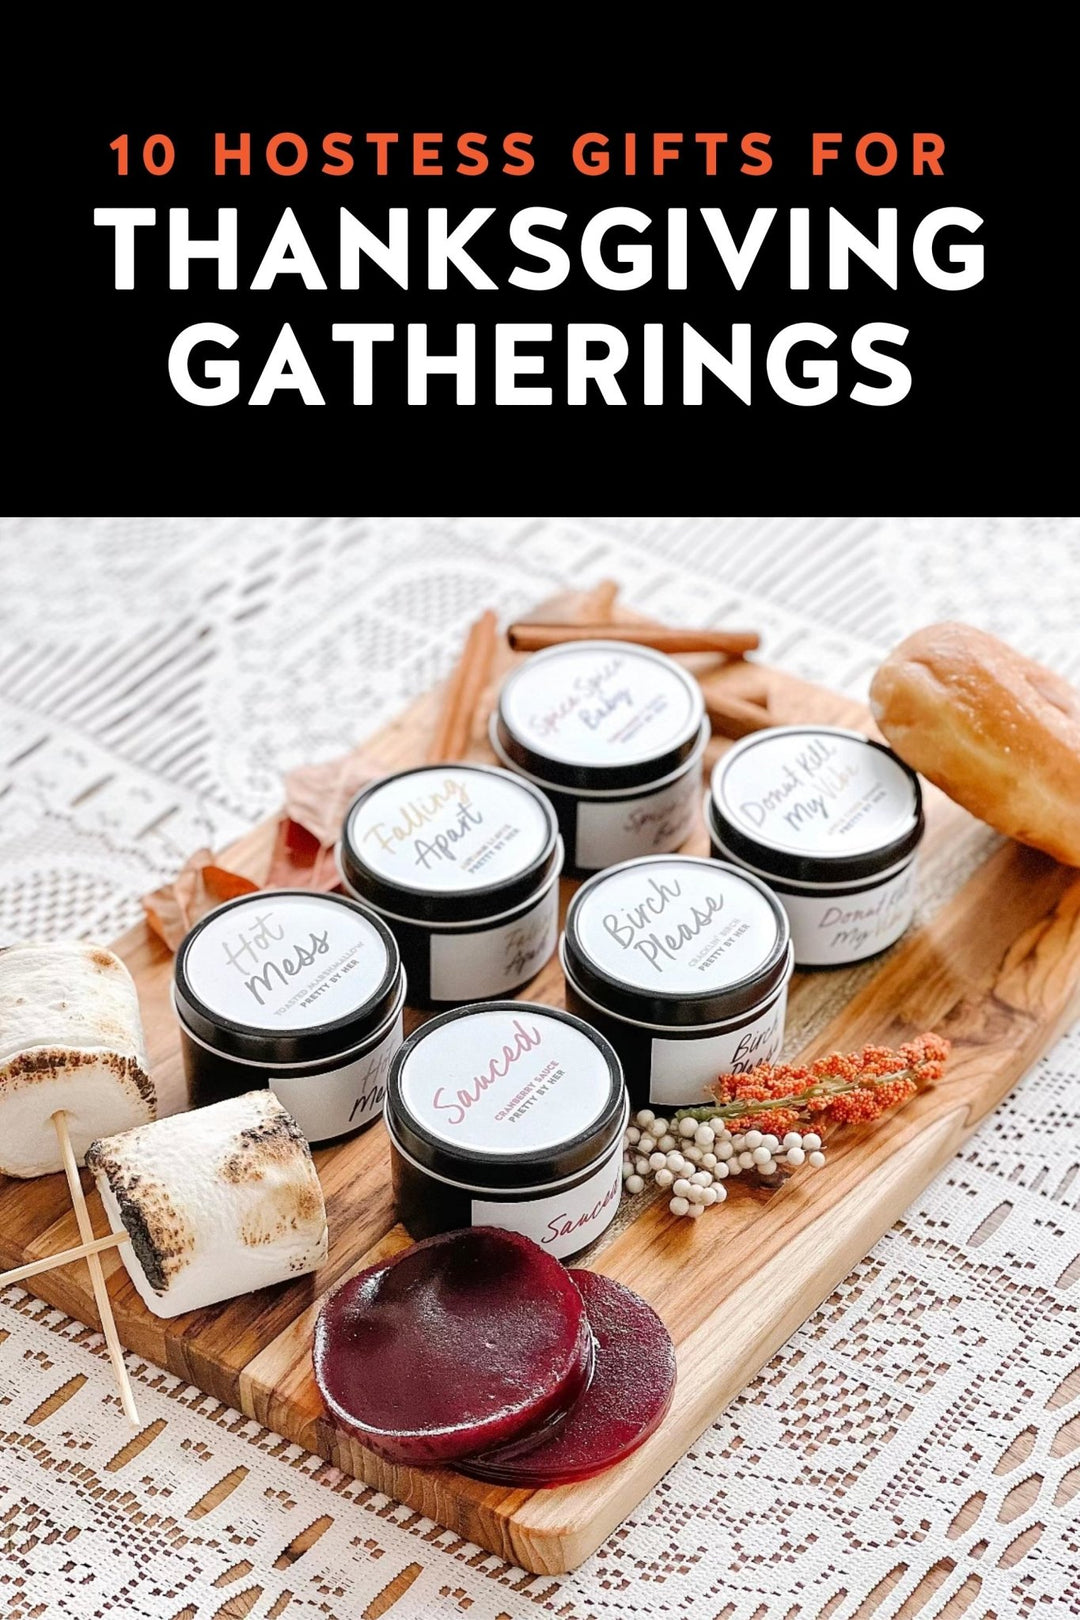 10 Hostess Gifts for Thanksgiving Gatherings - Pretty by Her